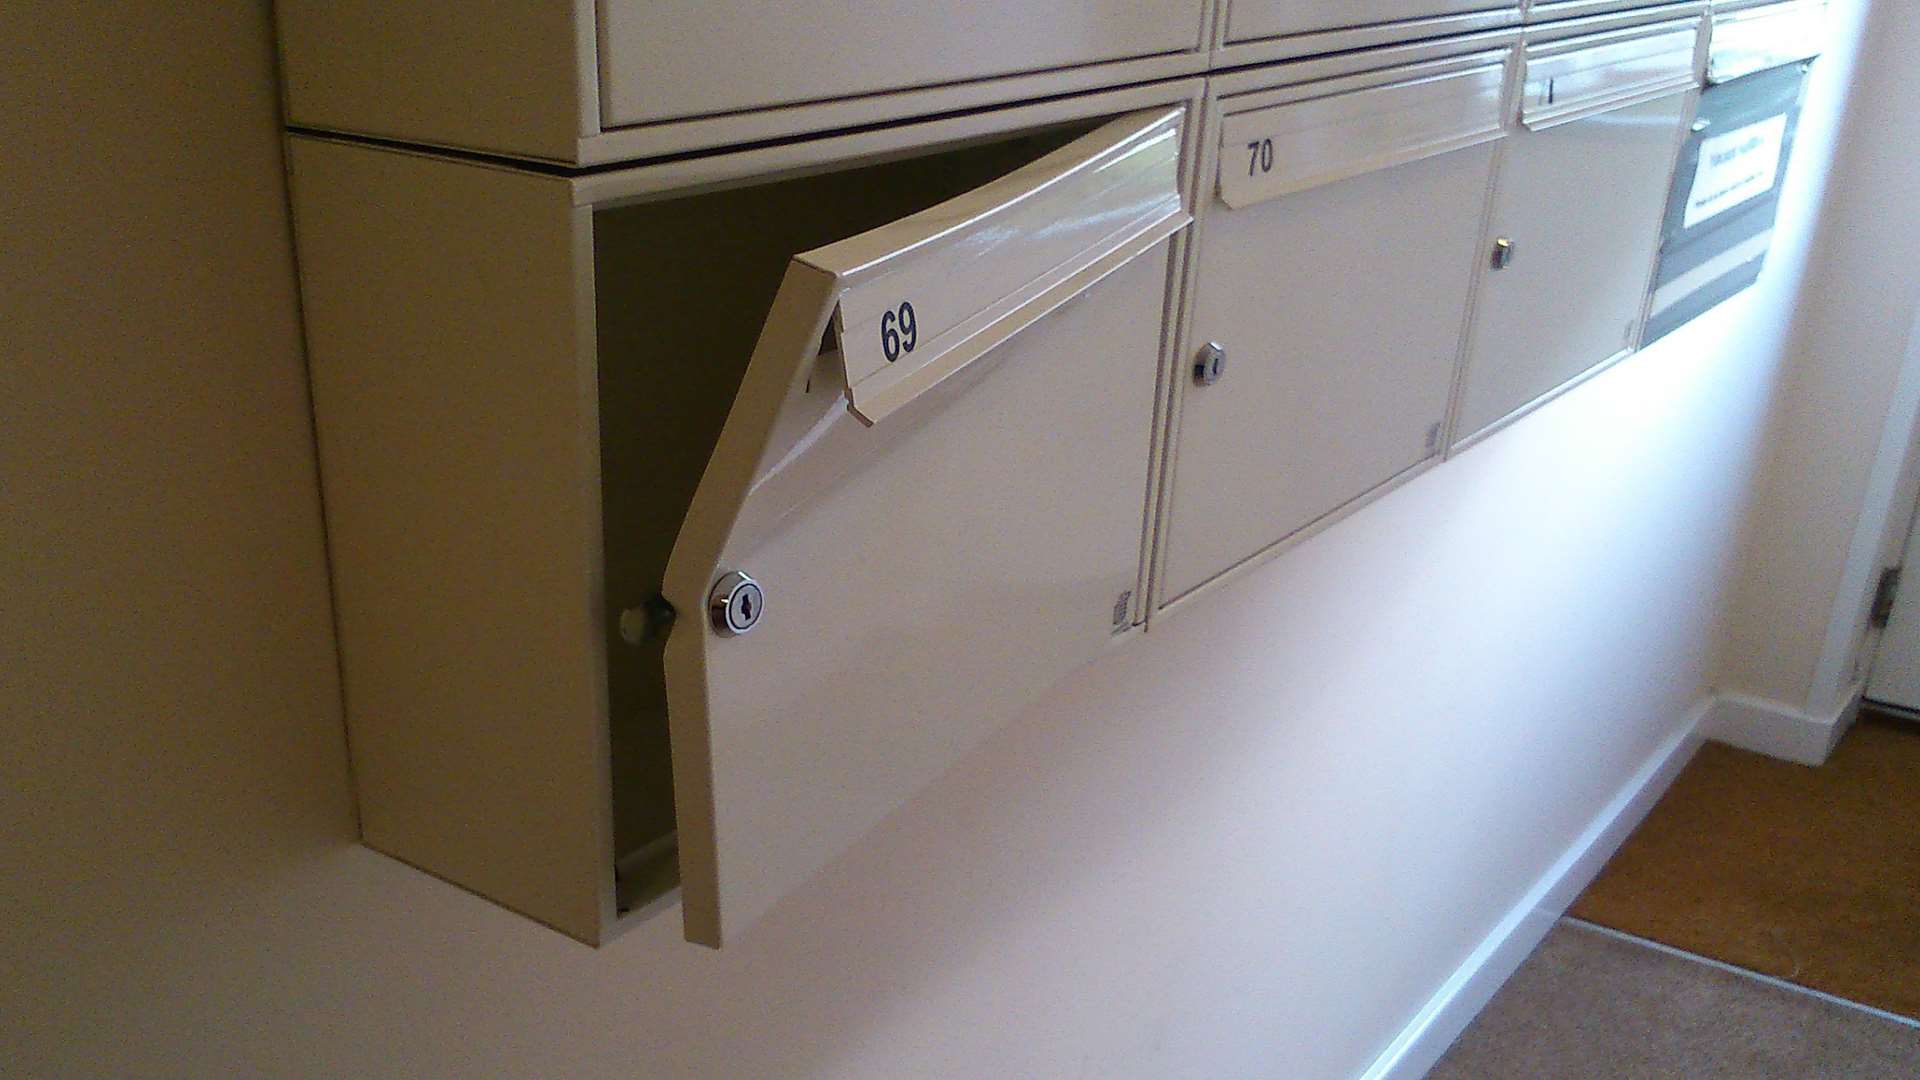 Damage was caused to several letterboxes in the Larkfield estate.